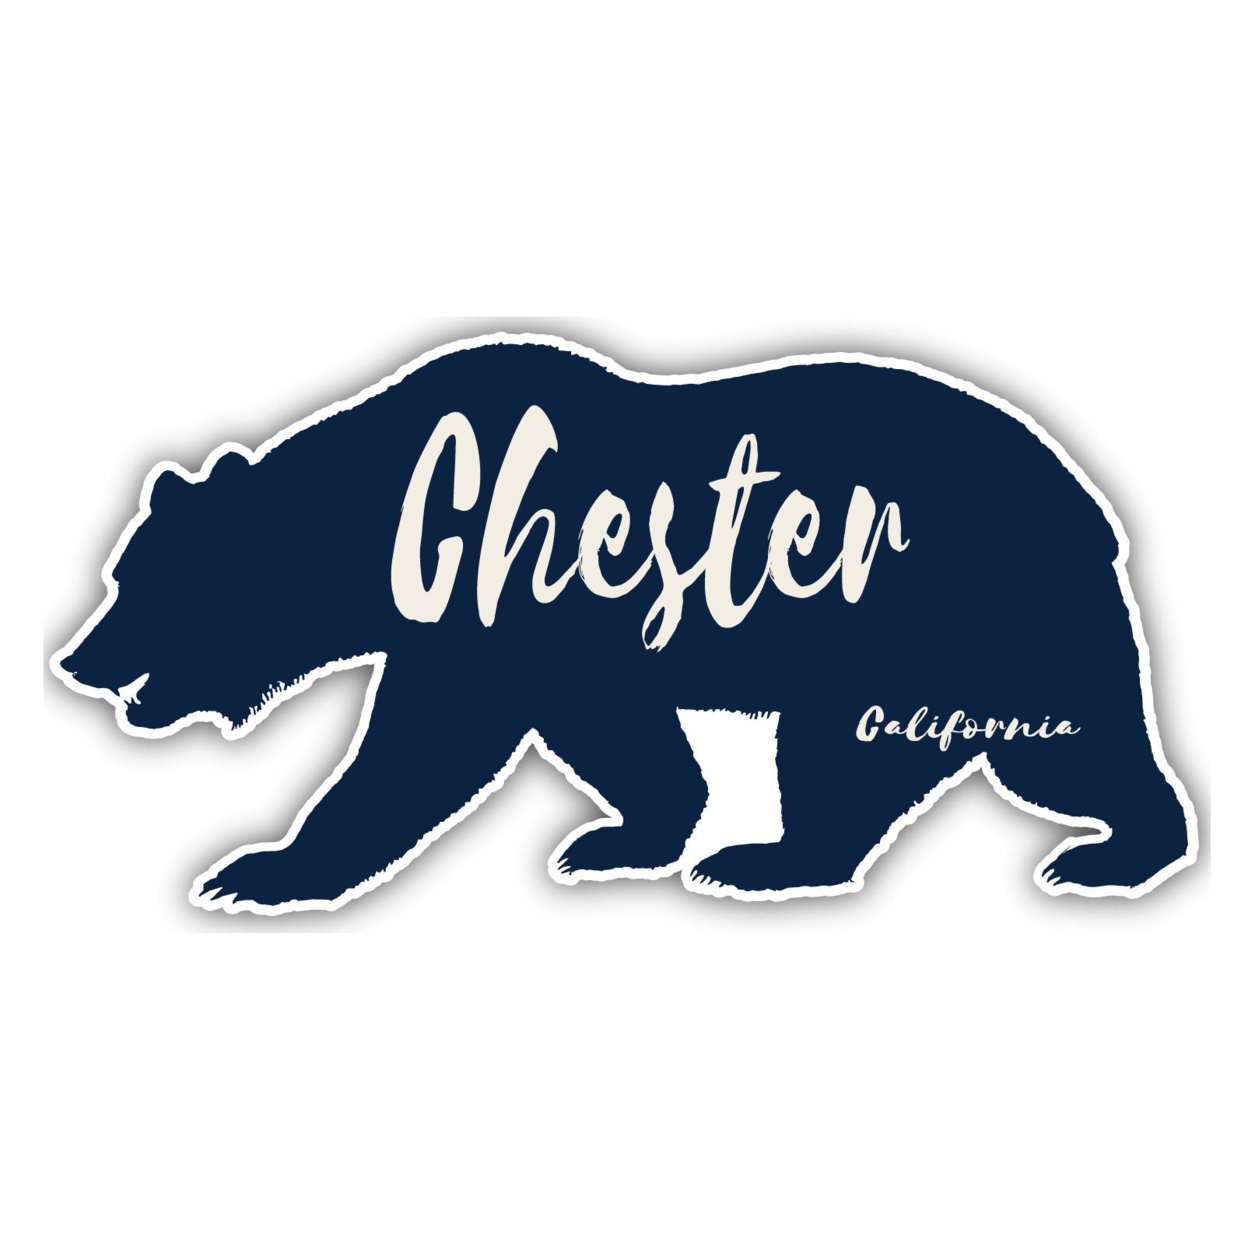 Chester California Souvenir Decorative Stickers (Choose Theme And Size) - 4-Pack, 8-Inch, Great Outdoors